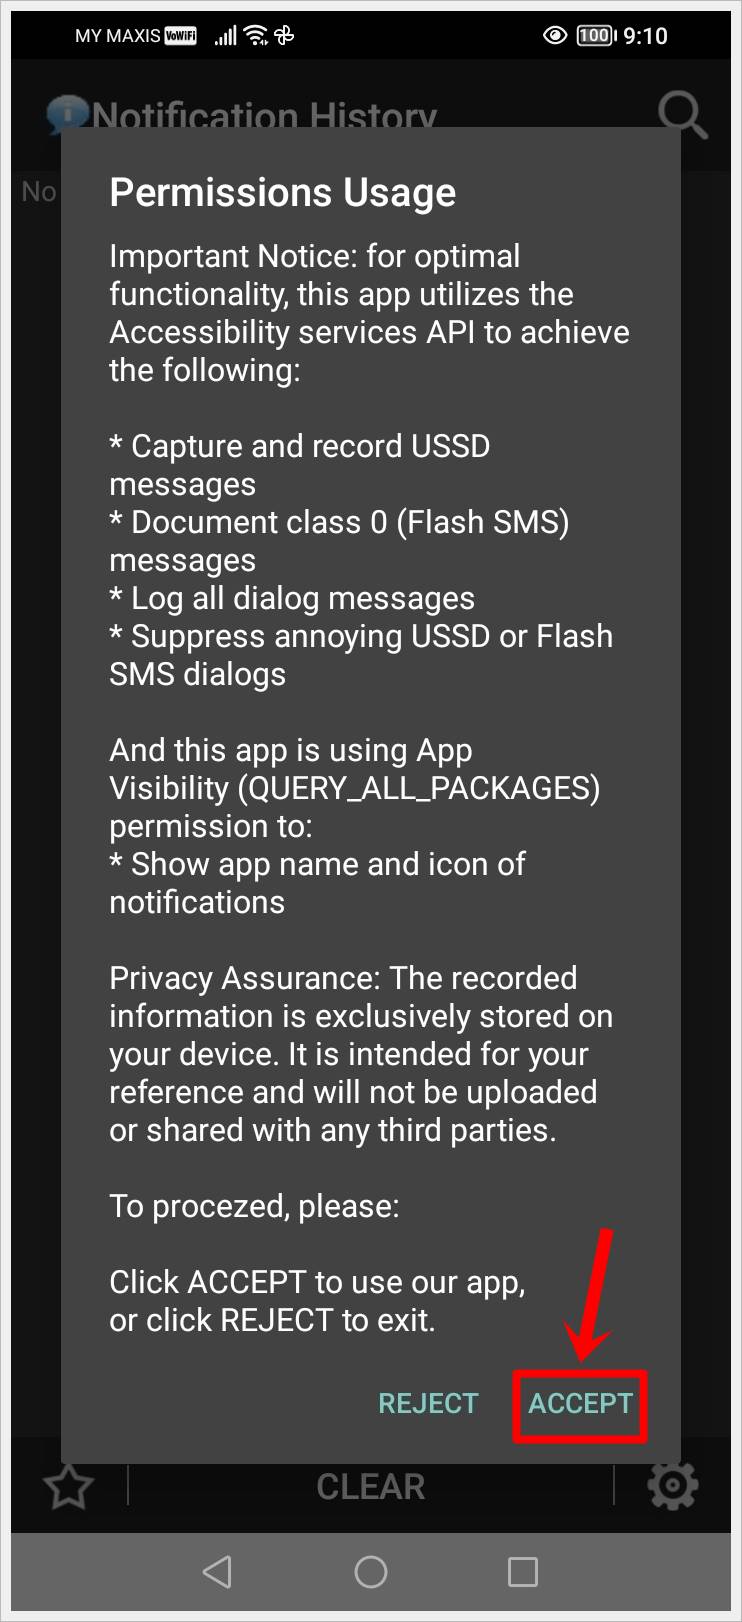 This image shows the 'Notification History' app has been installed and it's asking for certain permissions  for optimal functionality. The 'ACCEPT' button is highlighted.